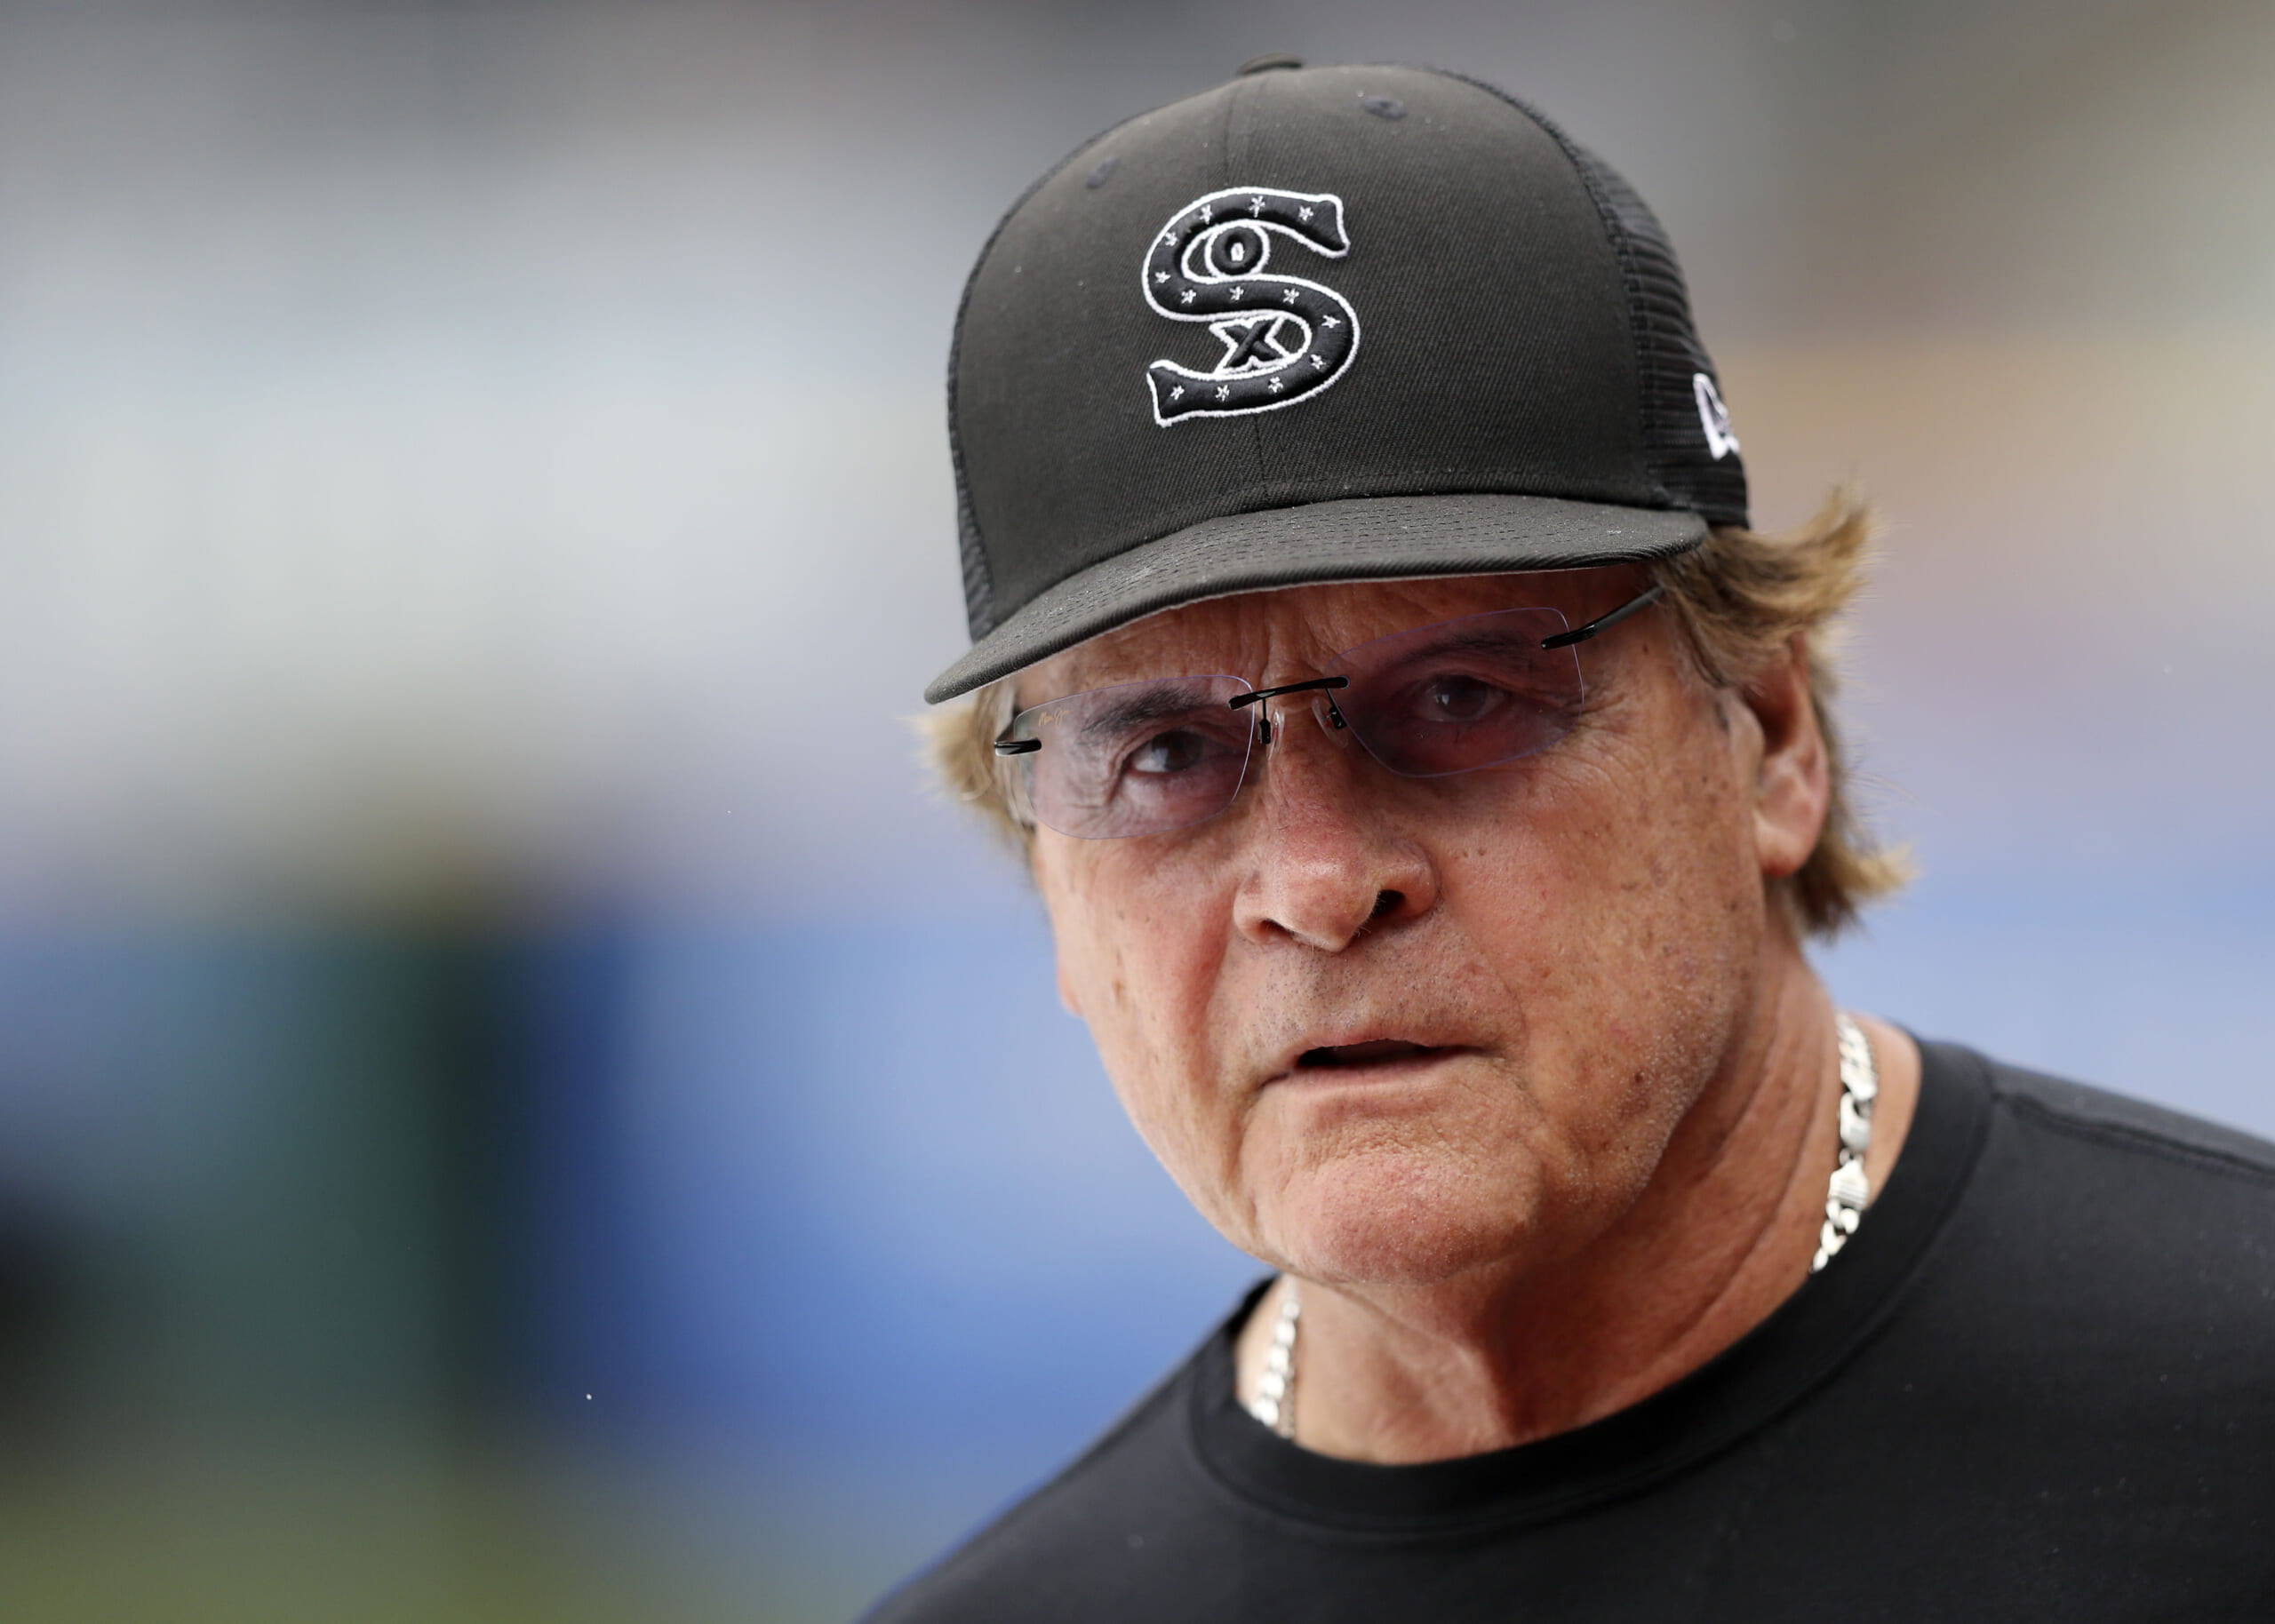 White Sox manager La Russa out indefinitely with health issue